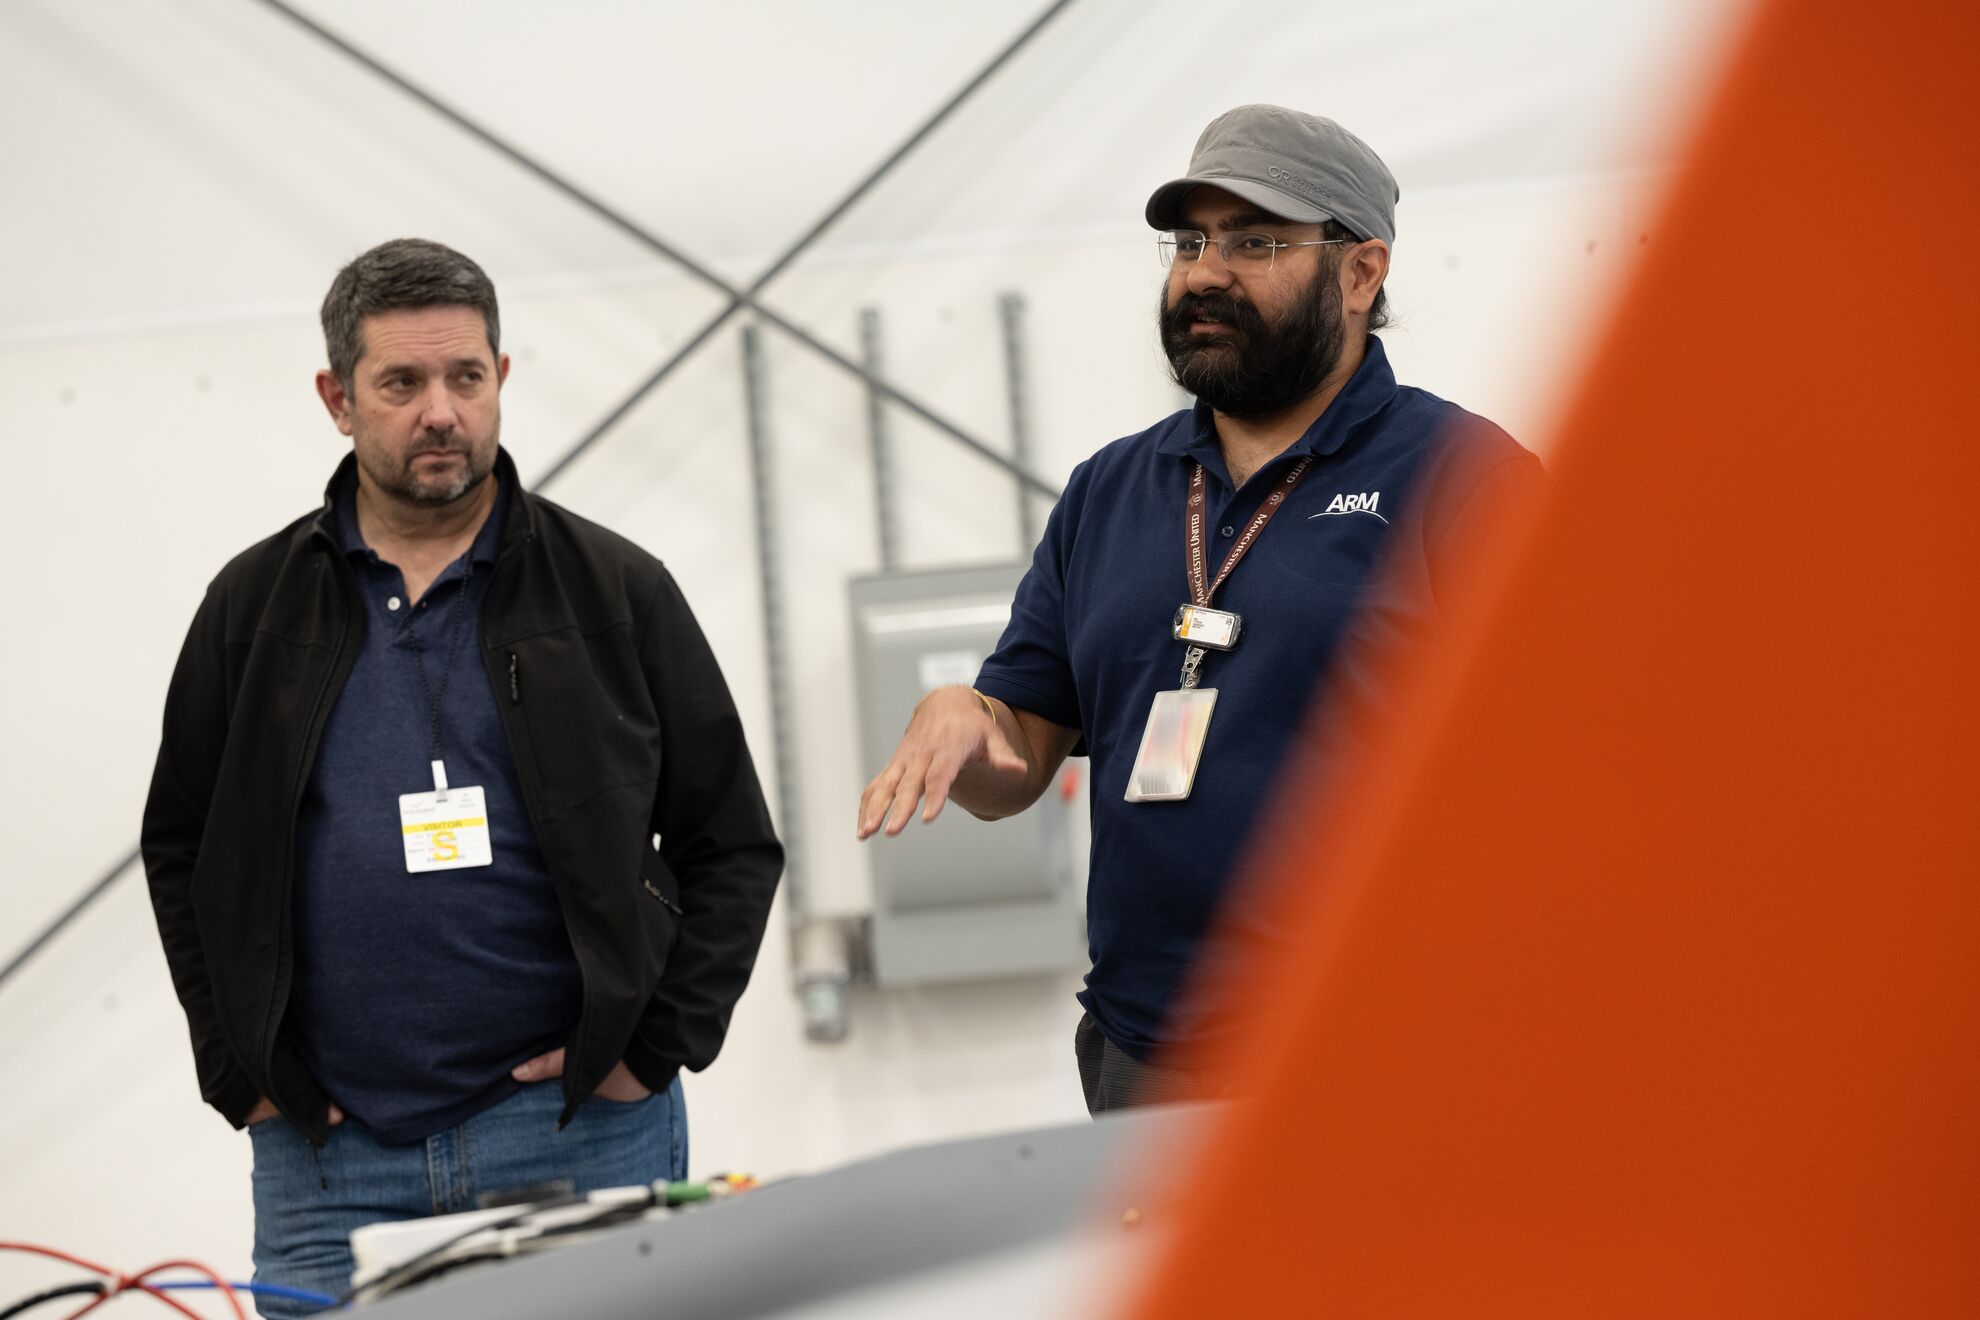 During the Blue Mountain Community College tour, ArcticShark lead engineer Hardeep Mehta describes the ArcticShark payload and integration. Photo is by Andrea Starr, Pacific Northwest National Laboratory.